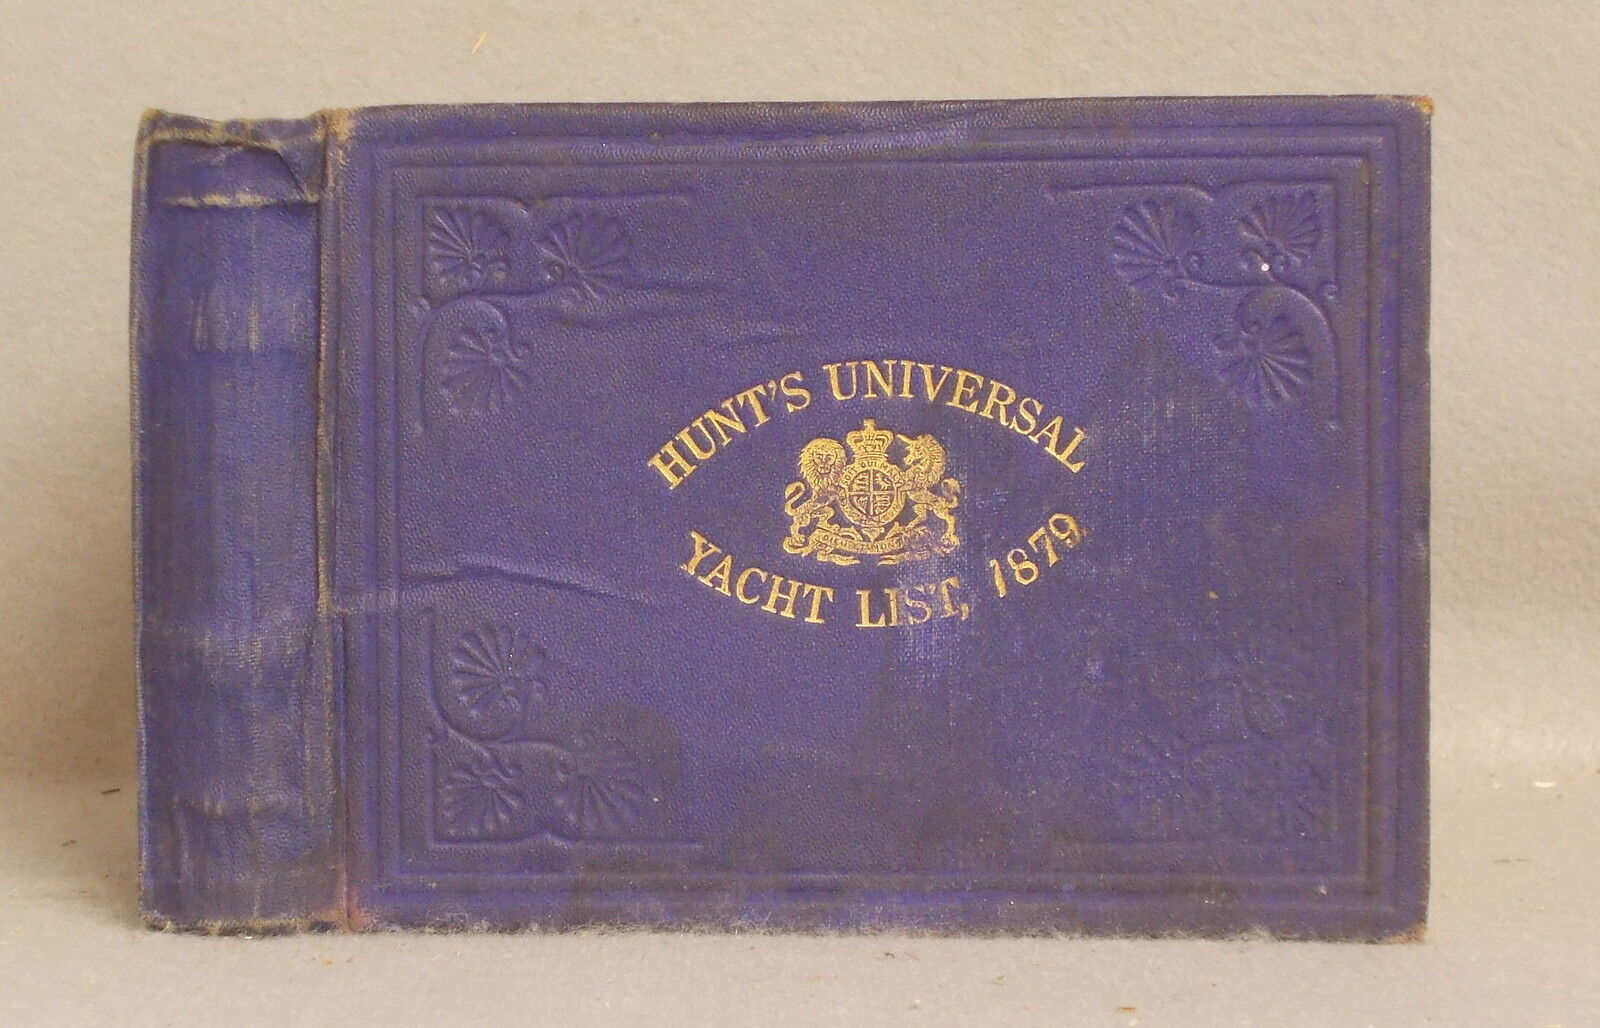 1879 hunt's universal yacht list owner's clubs register sailing club